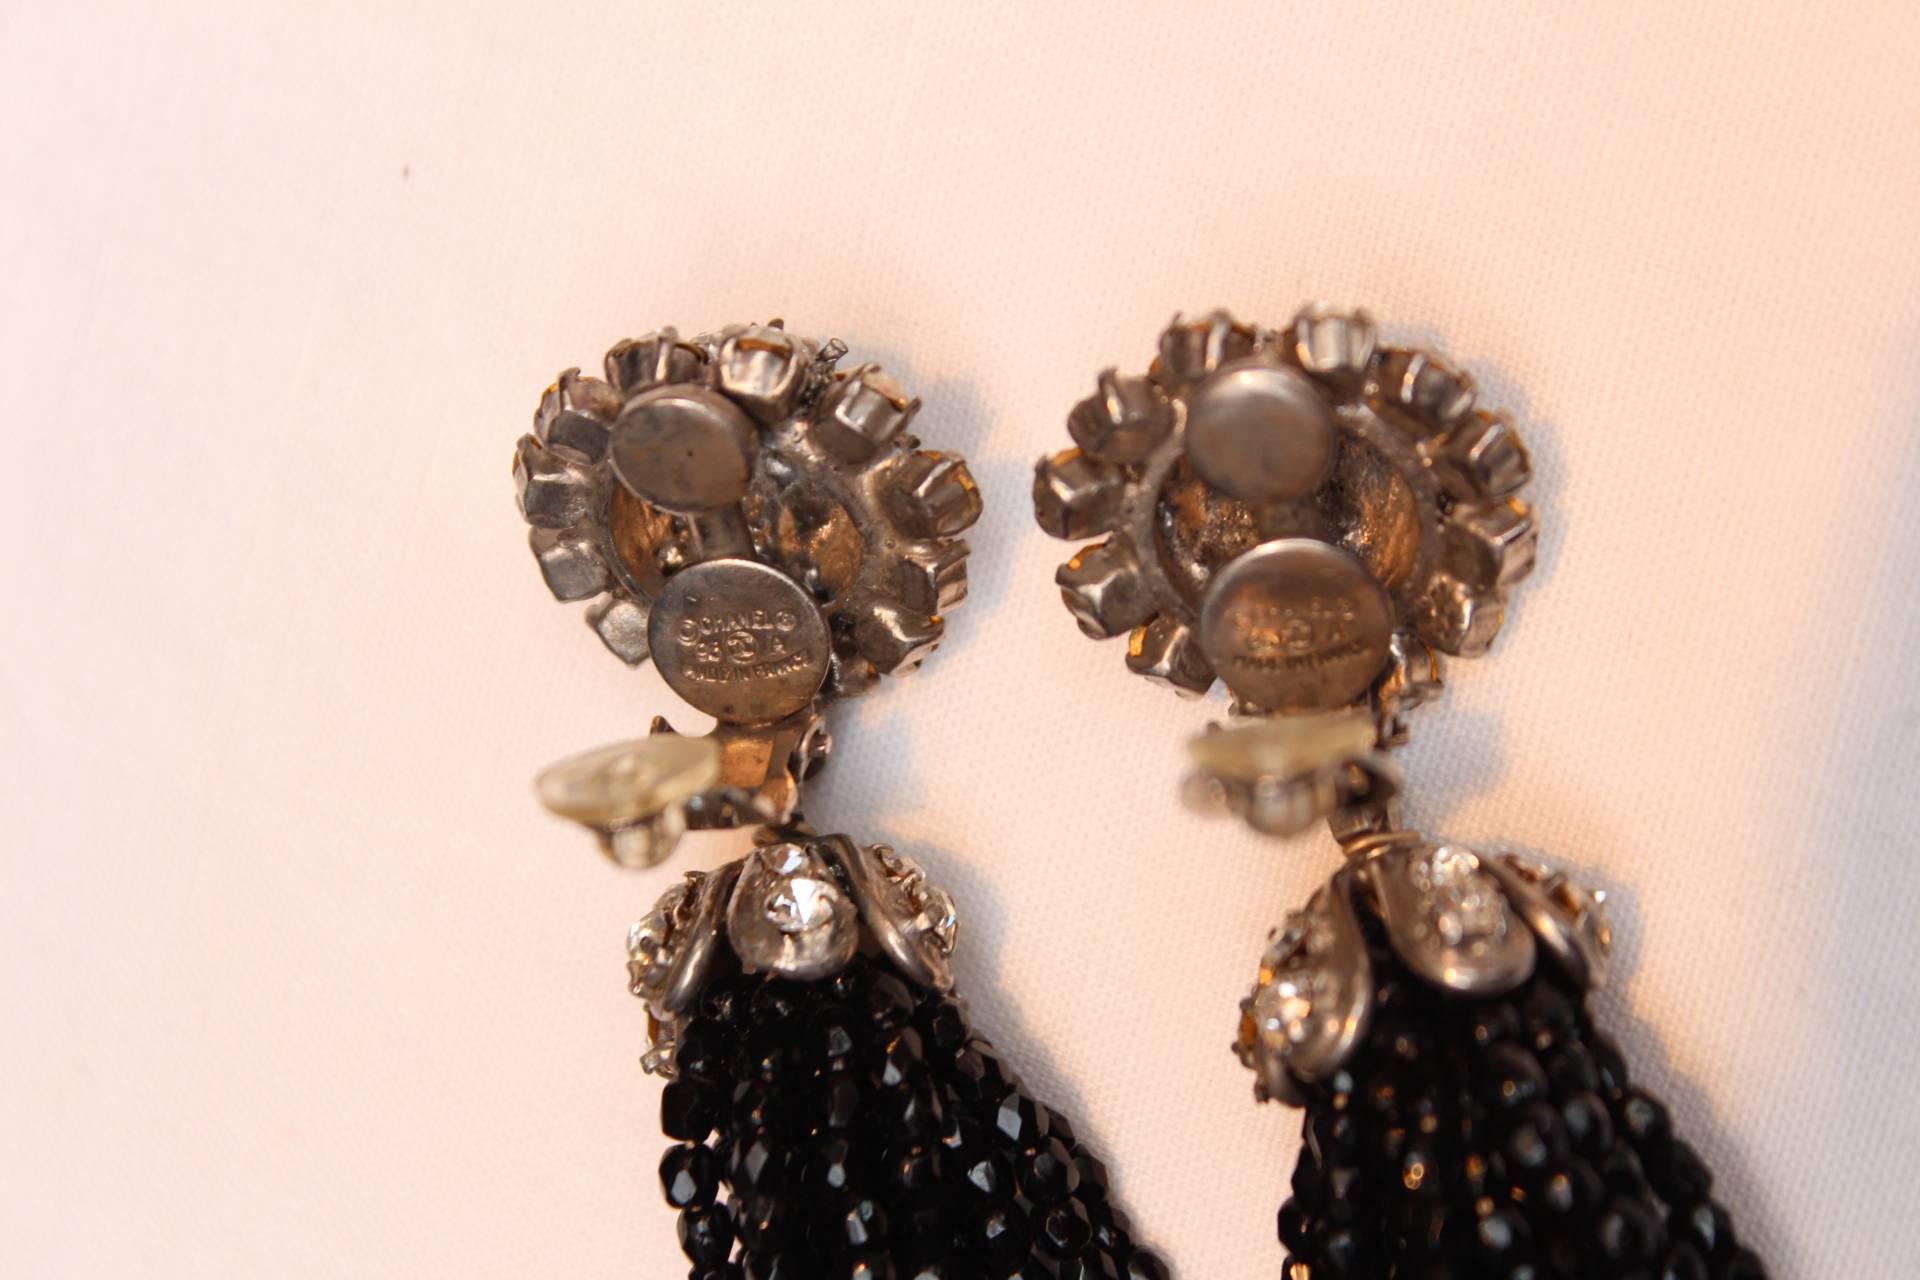 Women's 1995 Chanel Drop Earrings with a Tassel of Black Beads and White Crystals